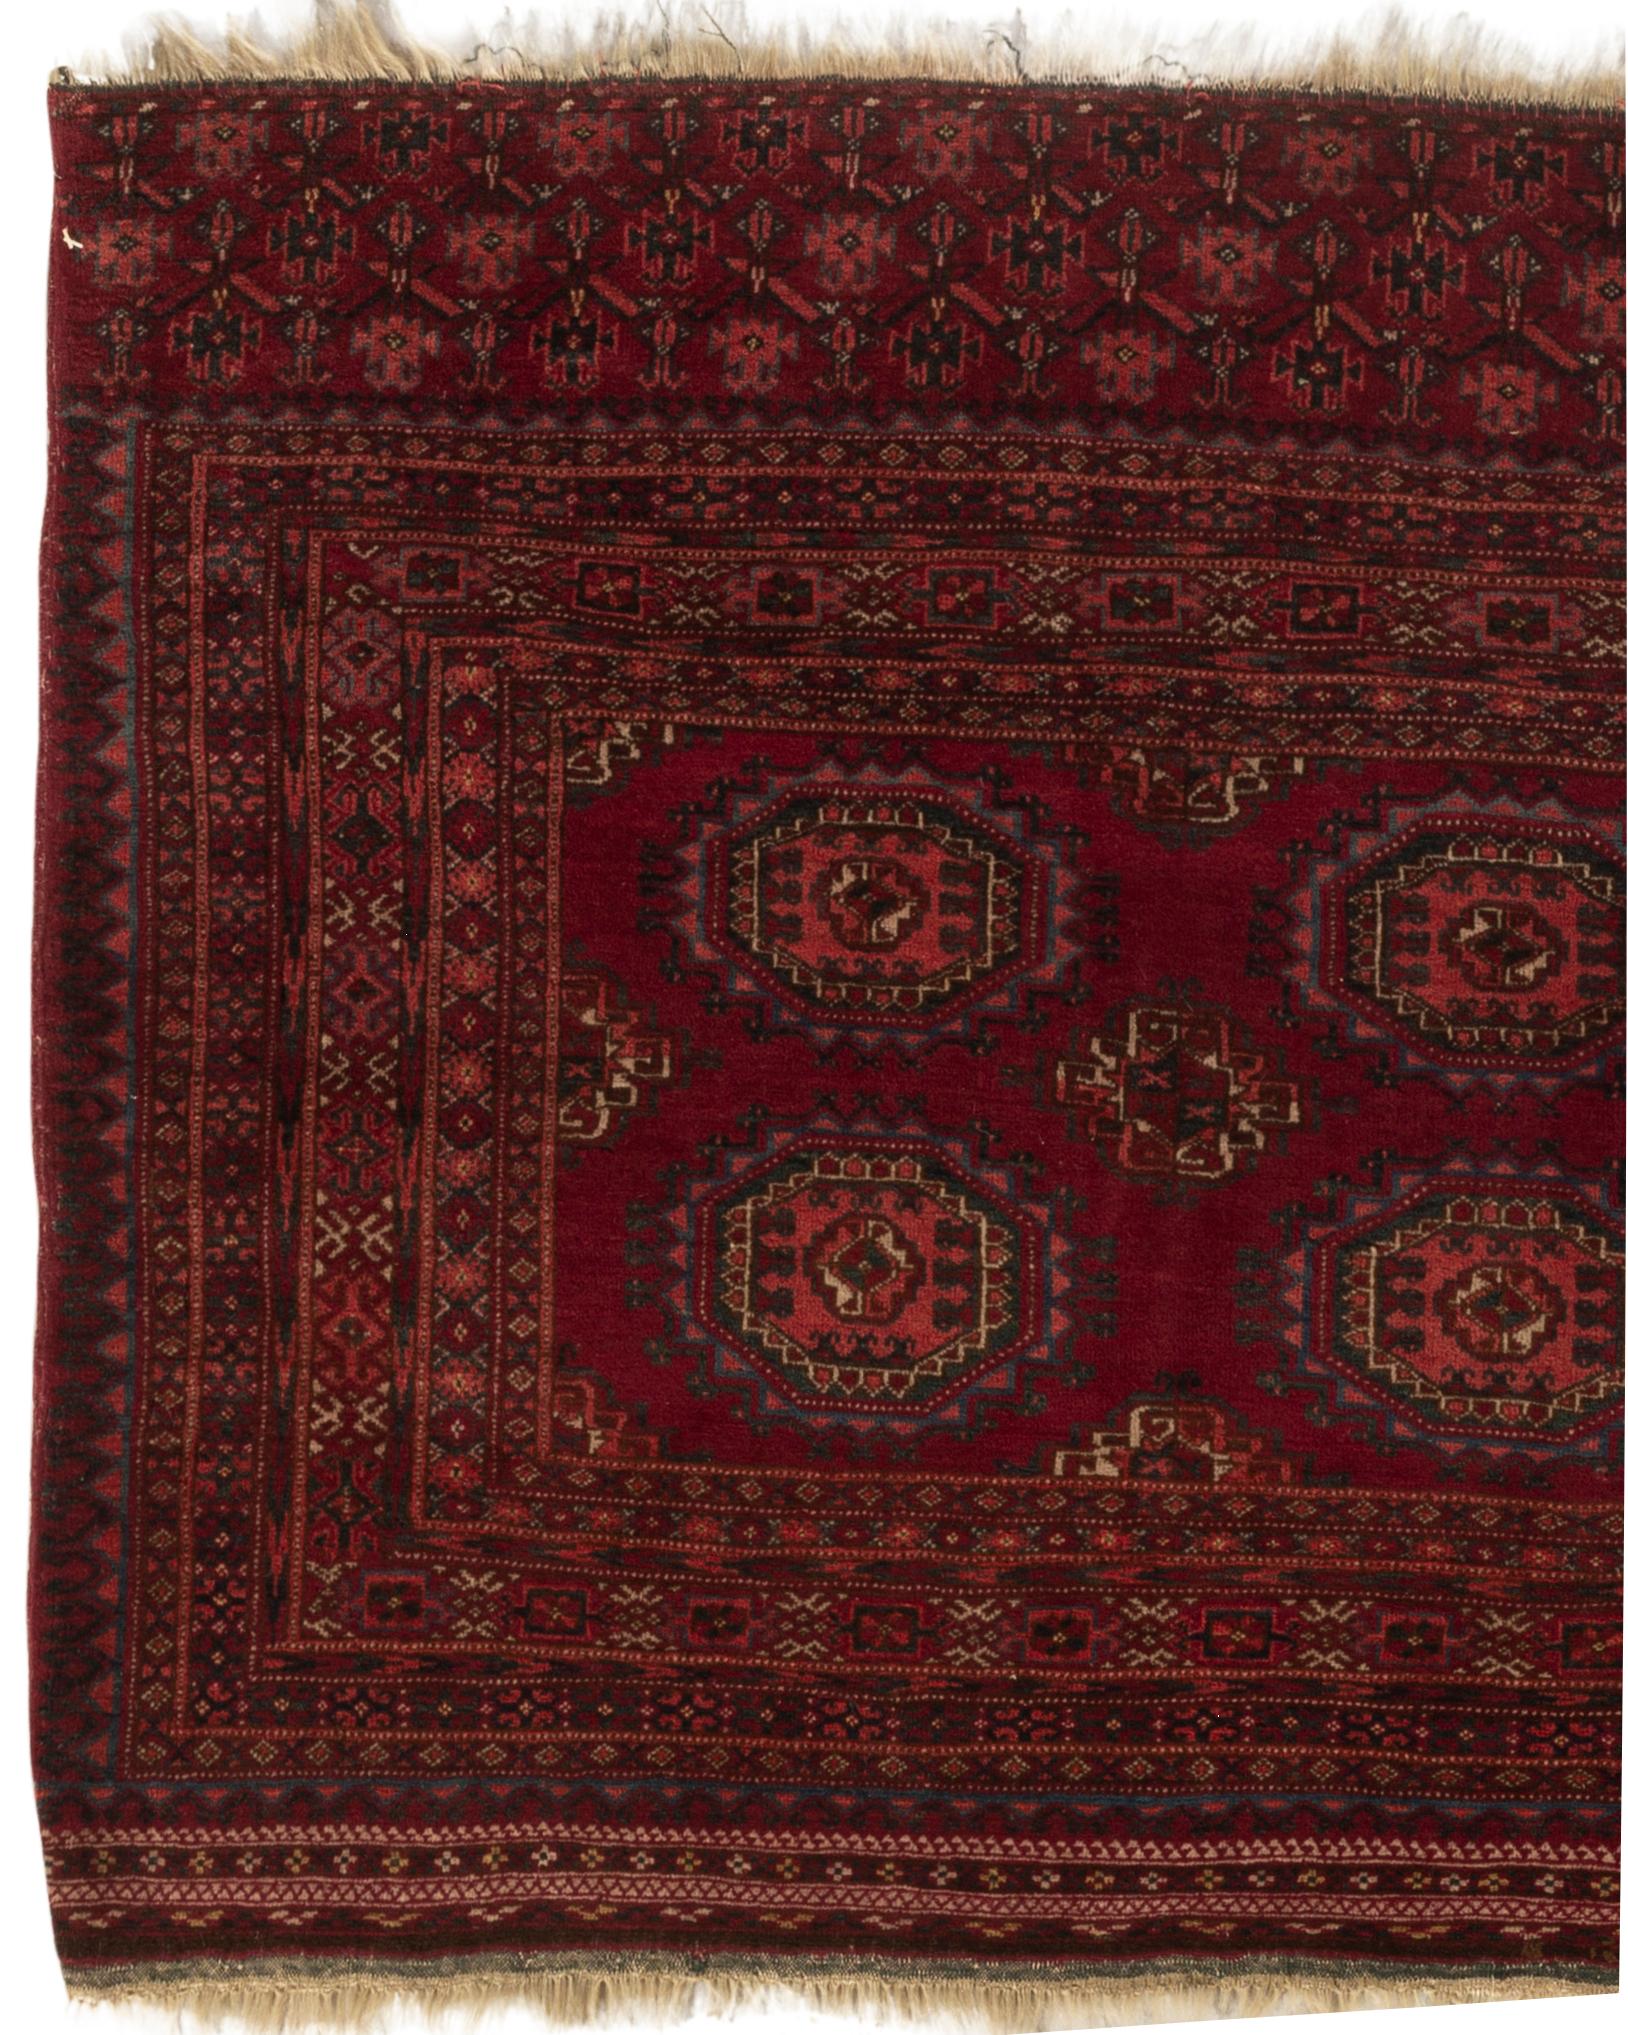 Antique Turkoman rug, circa 1880. A Turkoman or Turkmen rug from Turkmenistan formerly part of the Soviet Union. These are tribal rugs easily identifiable by their colors and the ethnic symbols used in the weavings. This lovely small rug is a